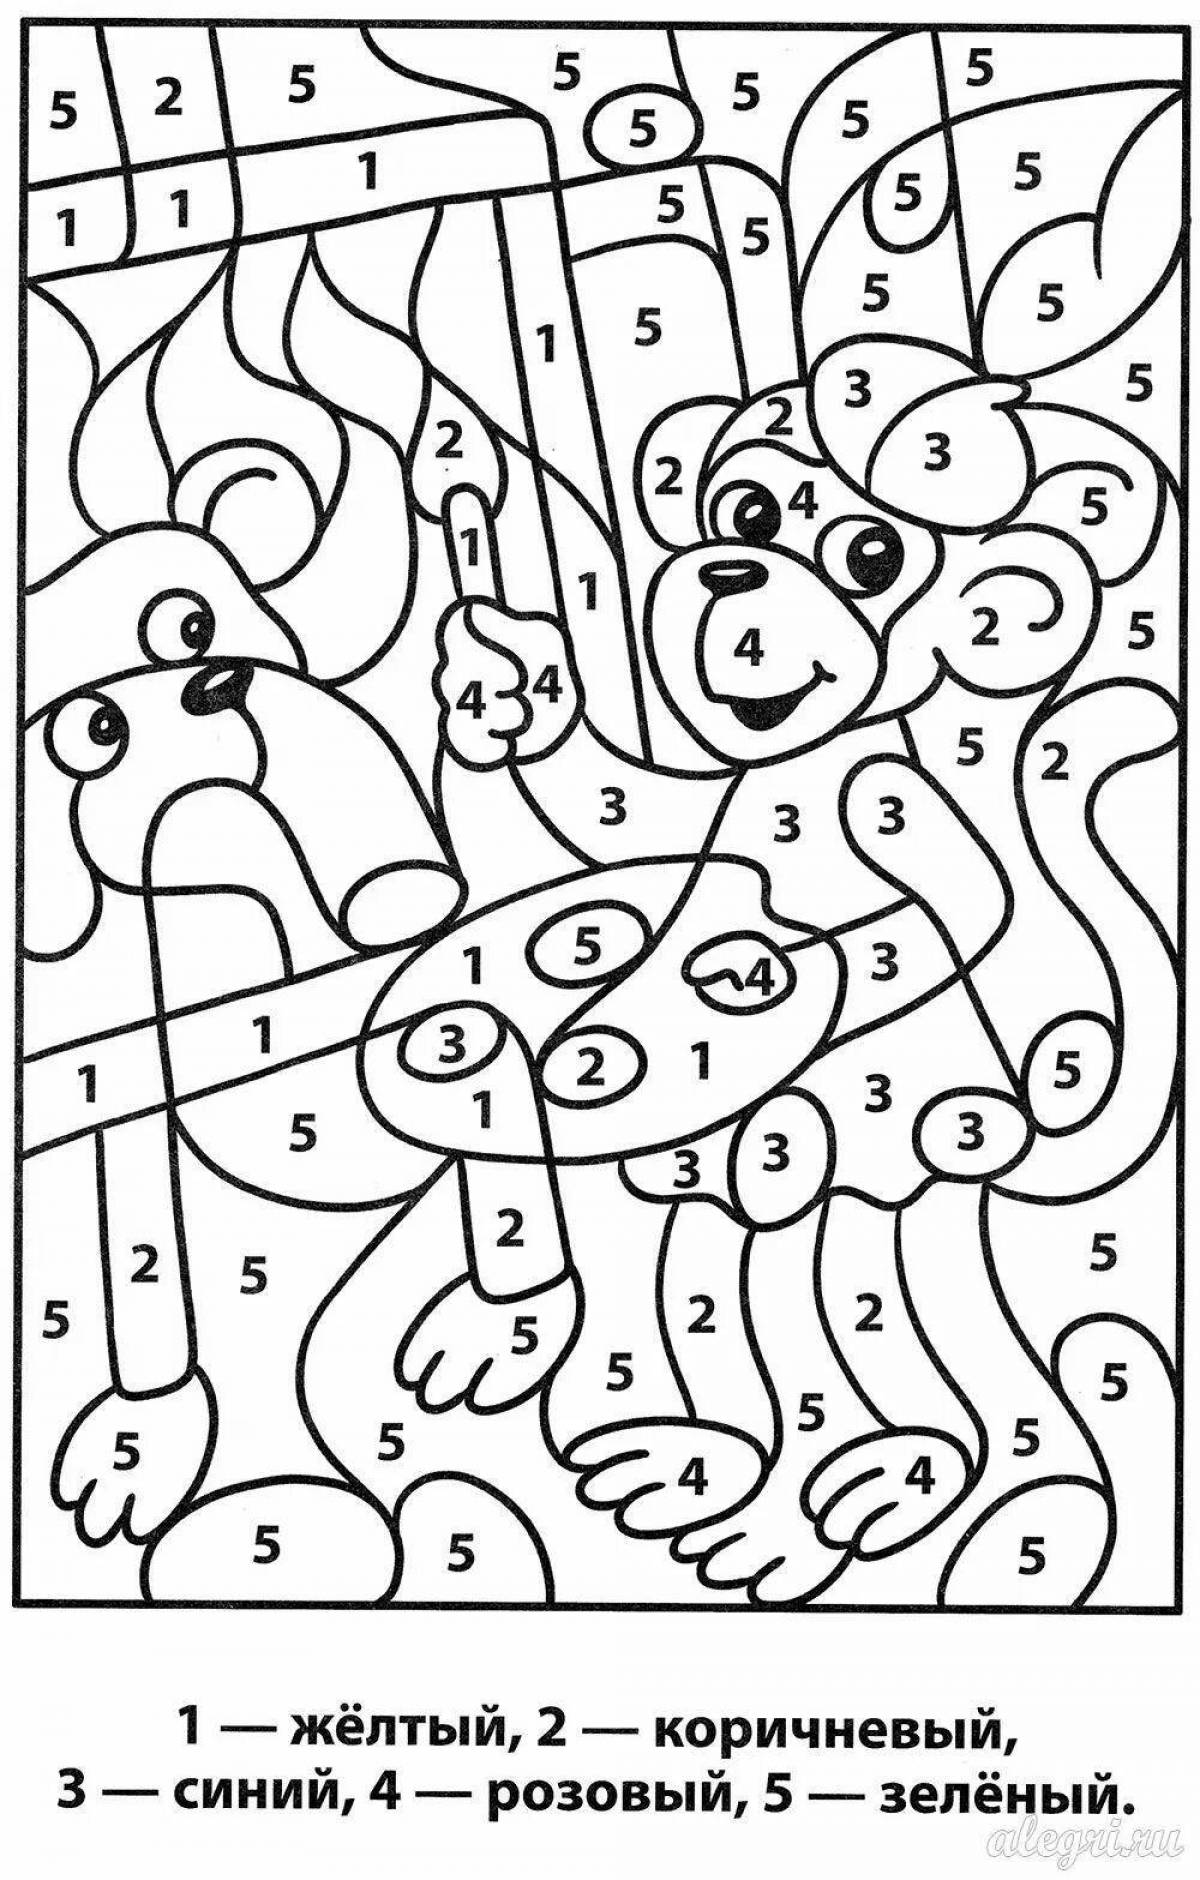 Fun spell coloring book for 7-8 year olds